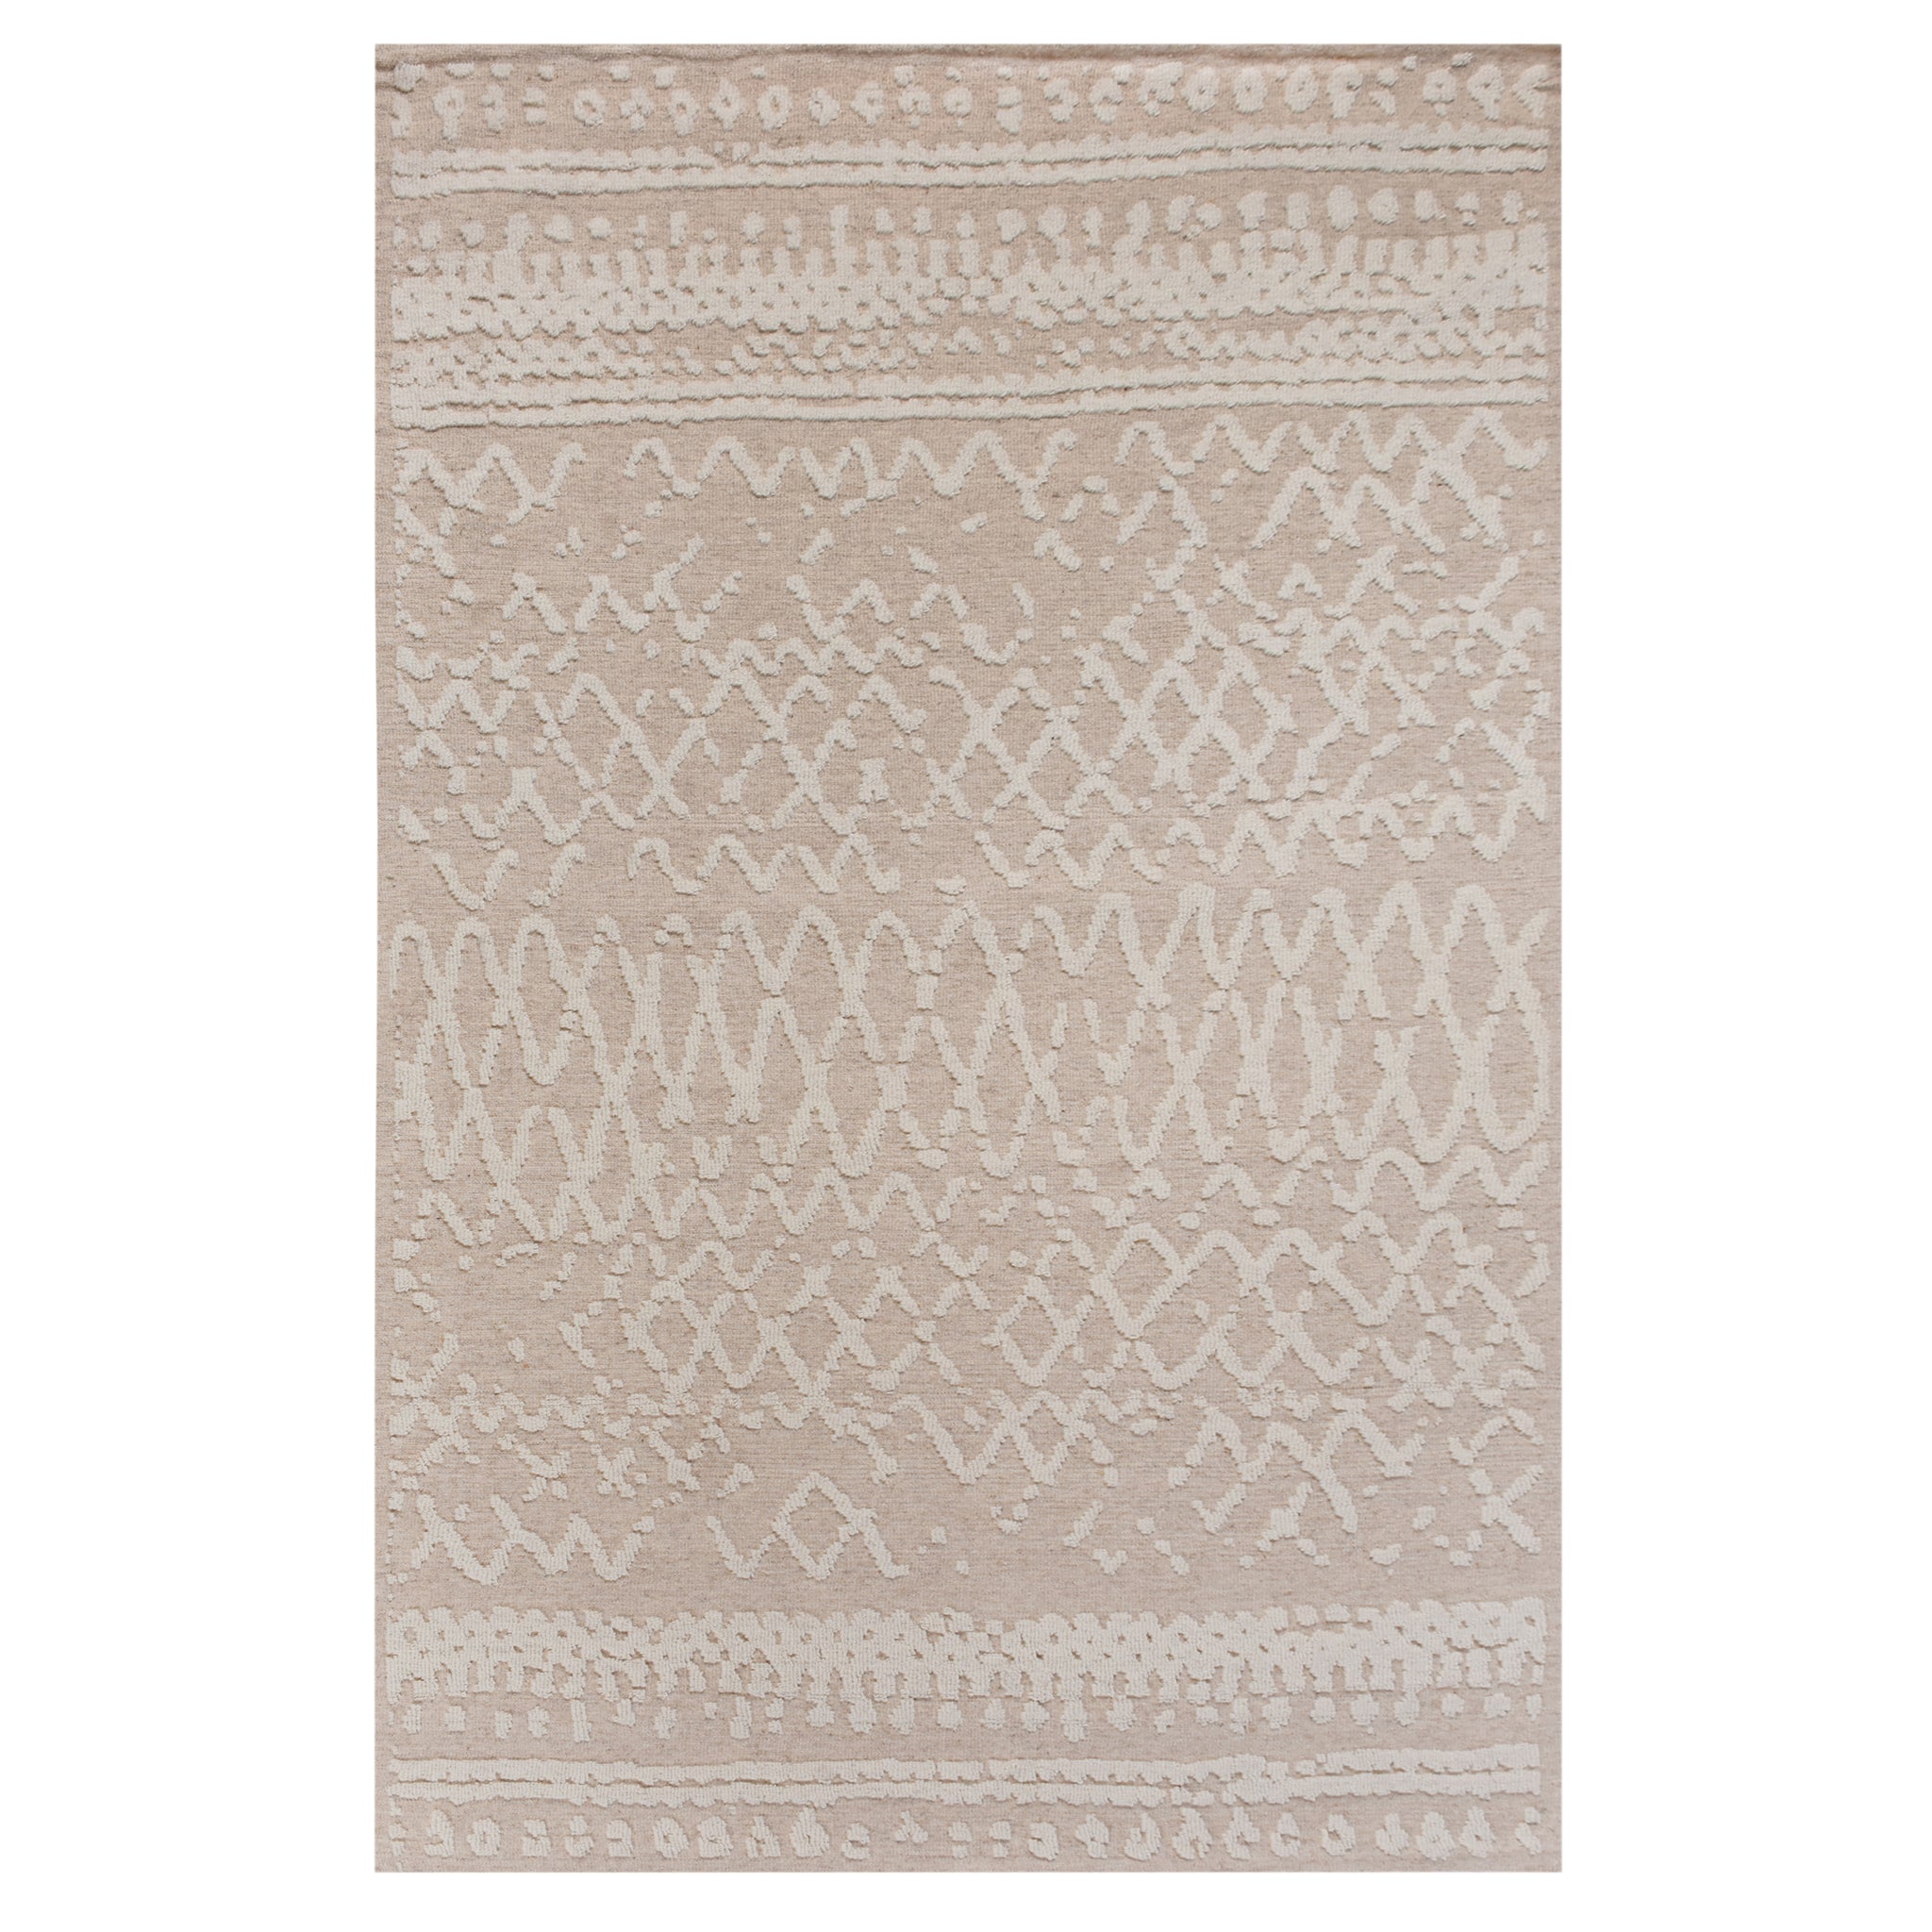 Cafu Knitted Beige & Ivory 160x230cm Wool and Polyester Rug